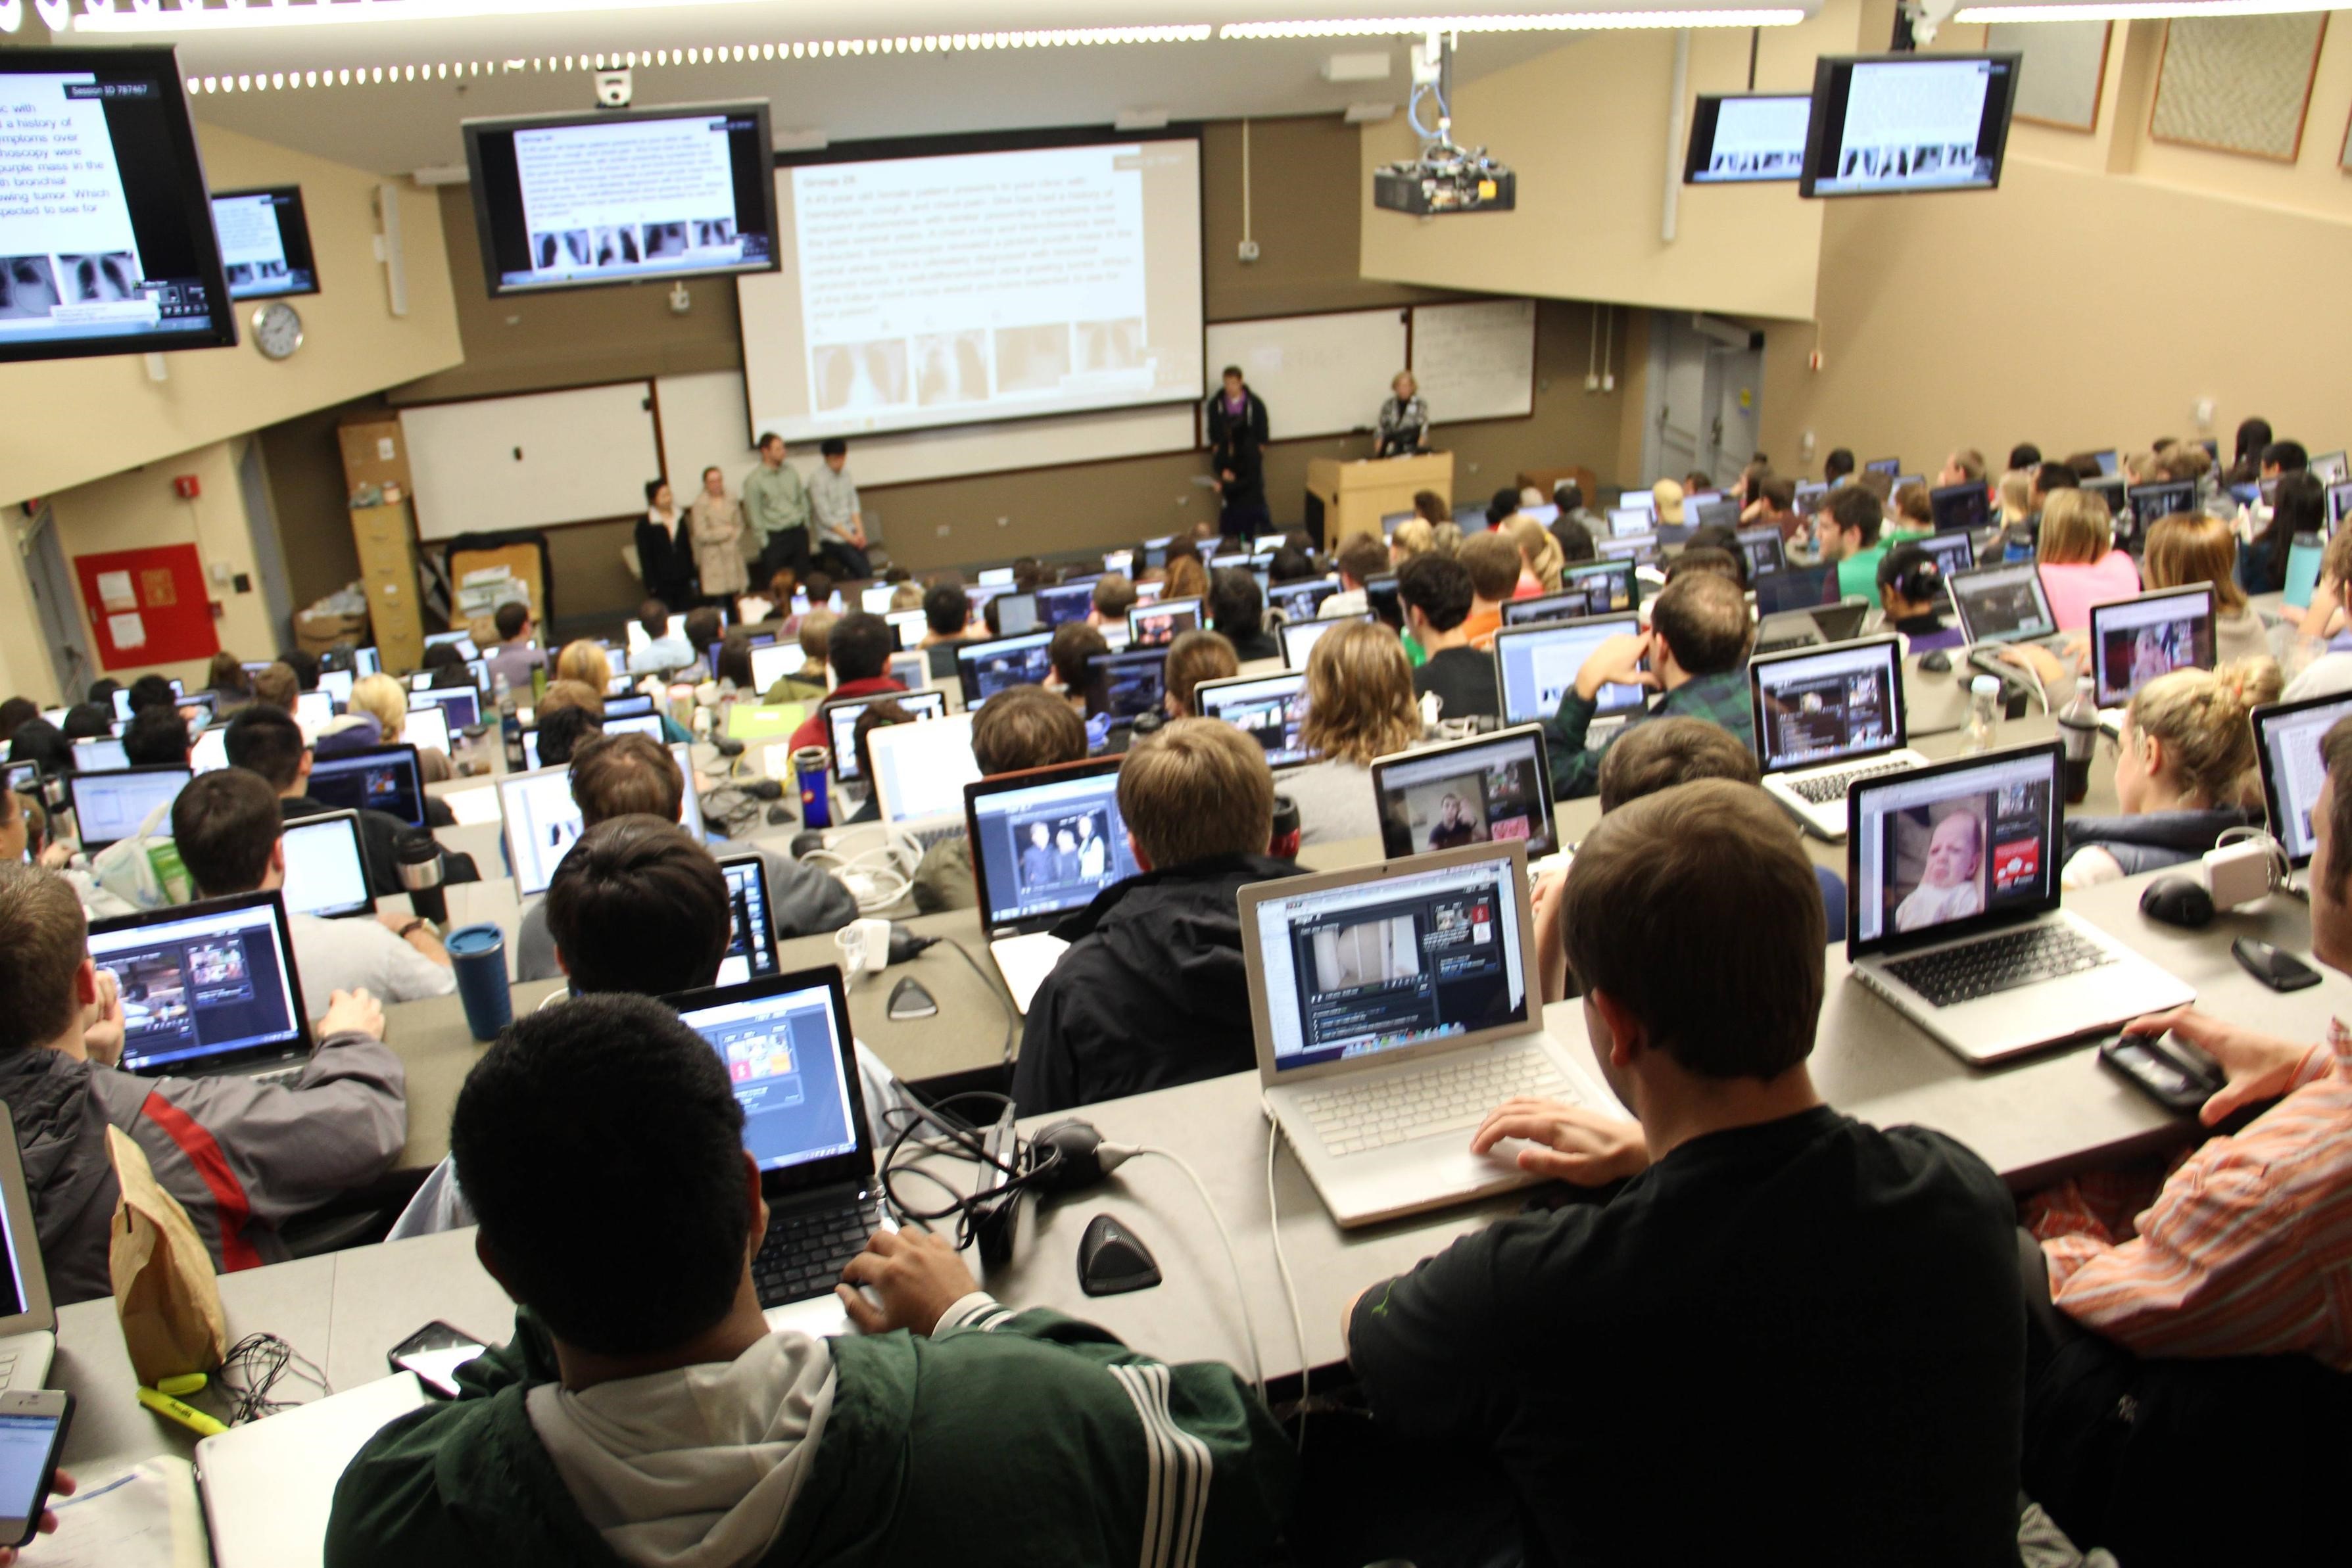 Should You Be Allowed to Use Your Laptop in Class?